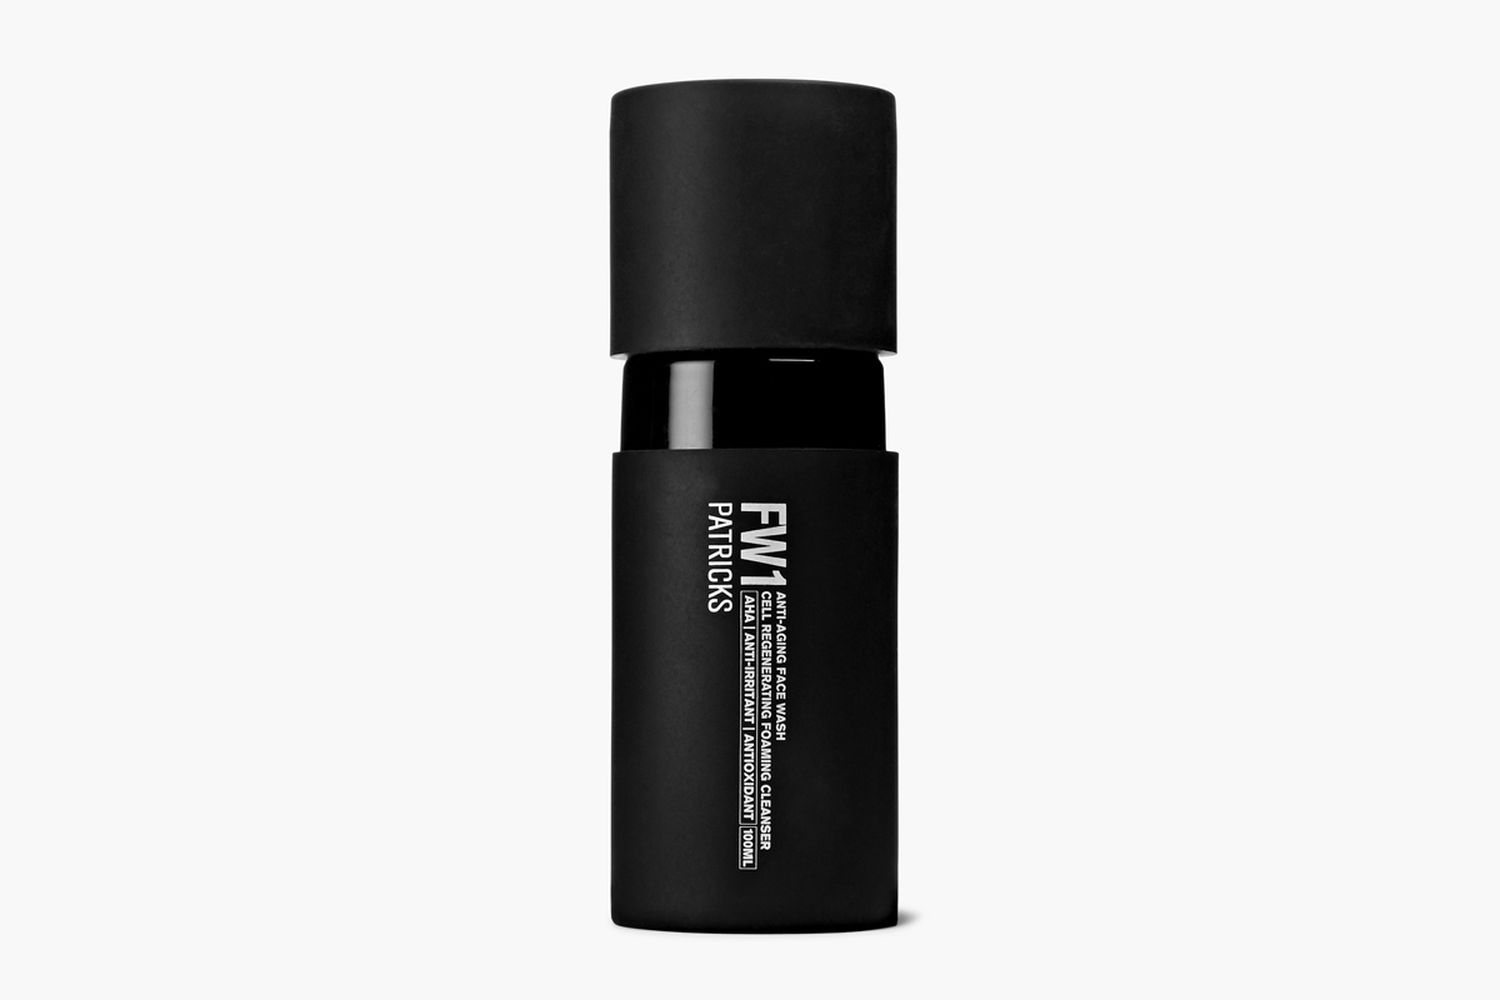 FW1 Anti-Aging Cell Regenerating Foaming Face Wash